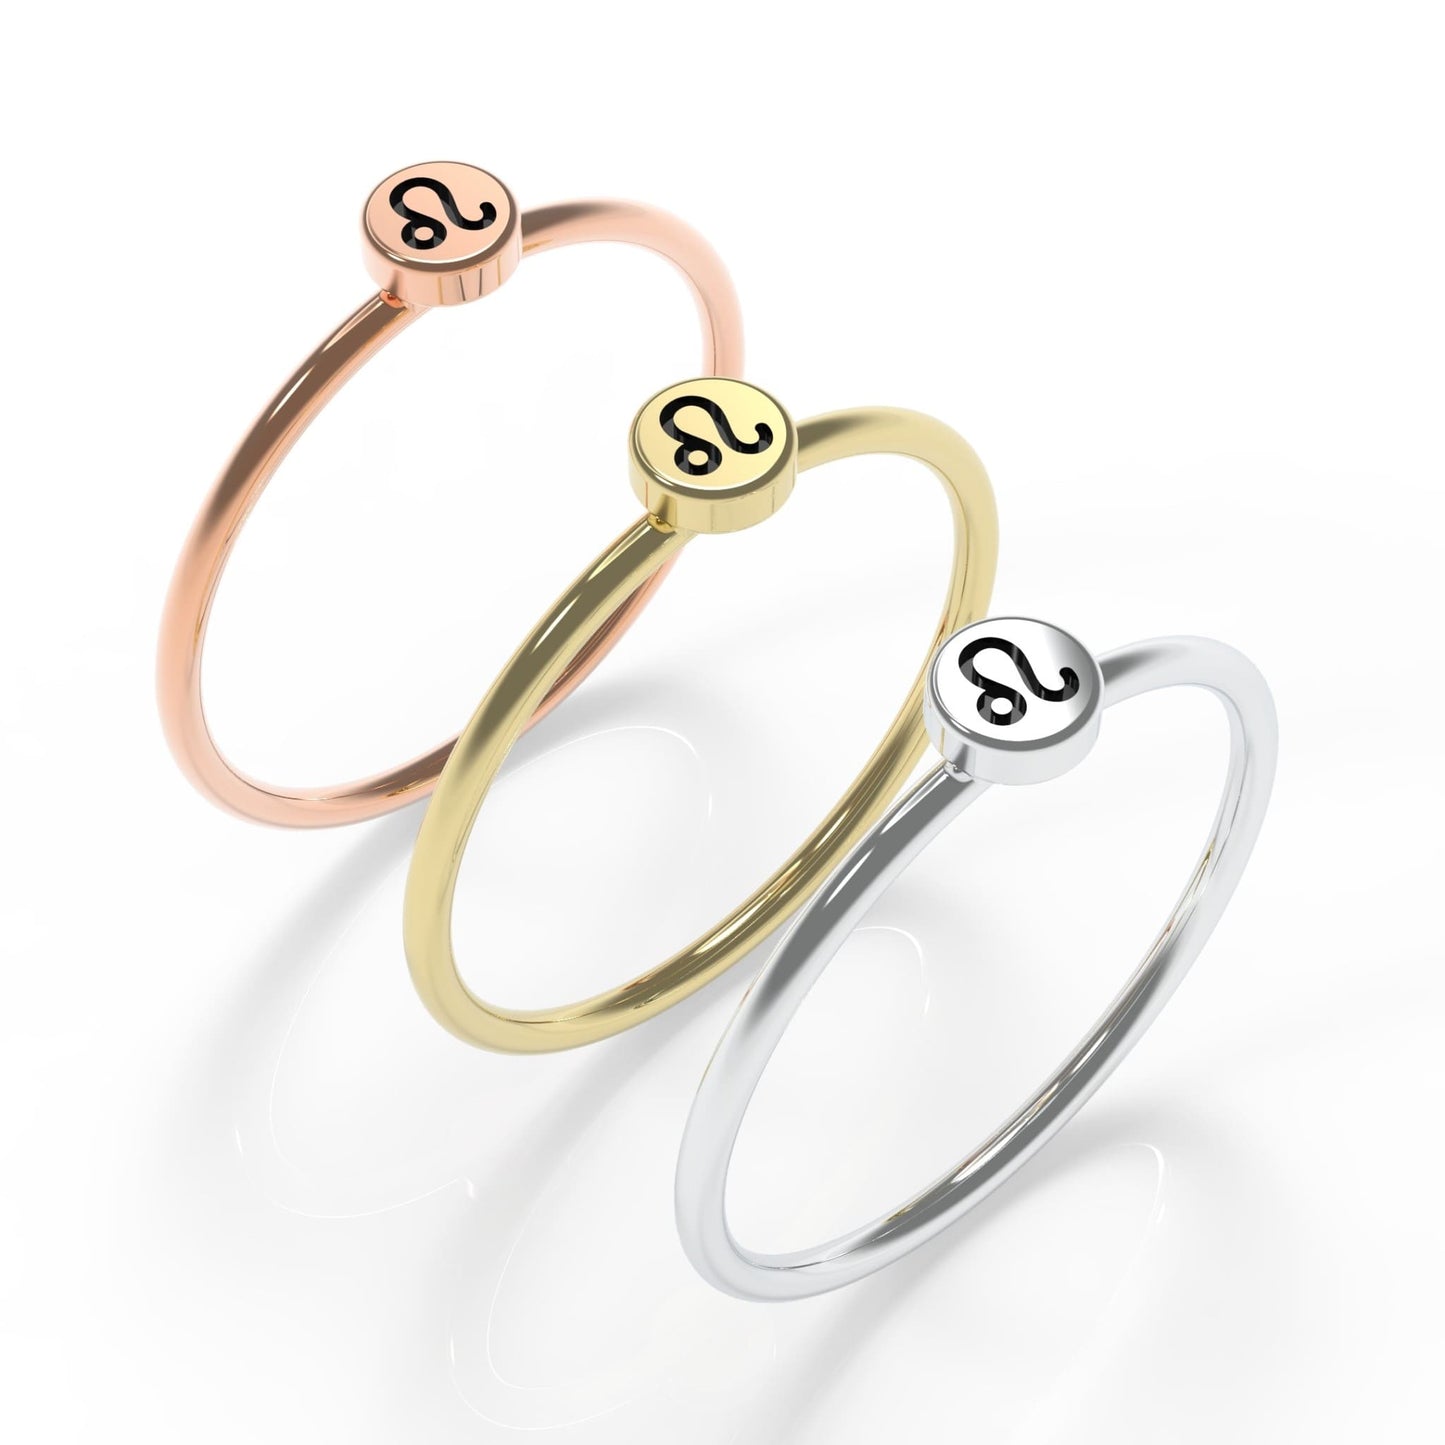 Leo Zodiac Sign Stackable Rings for Women